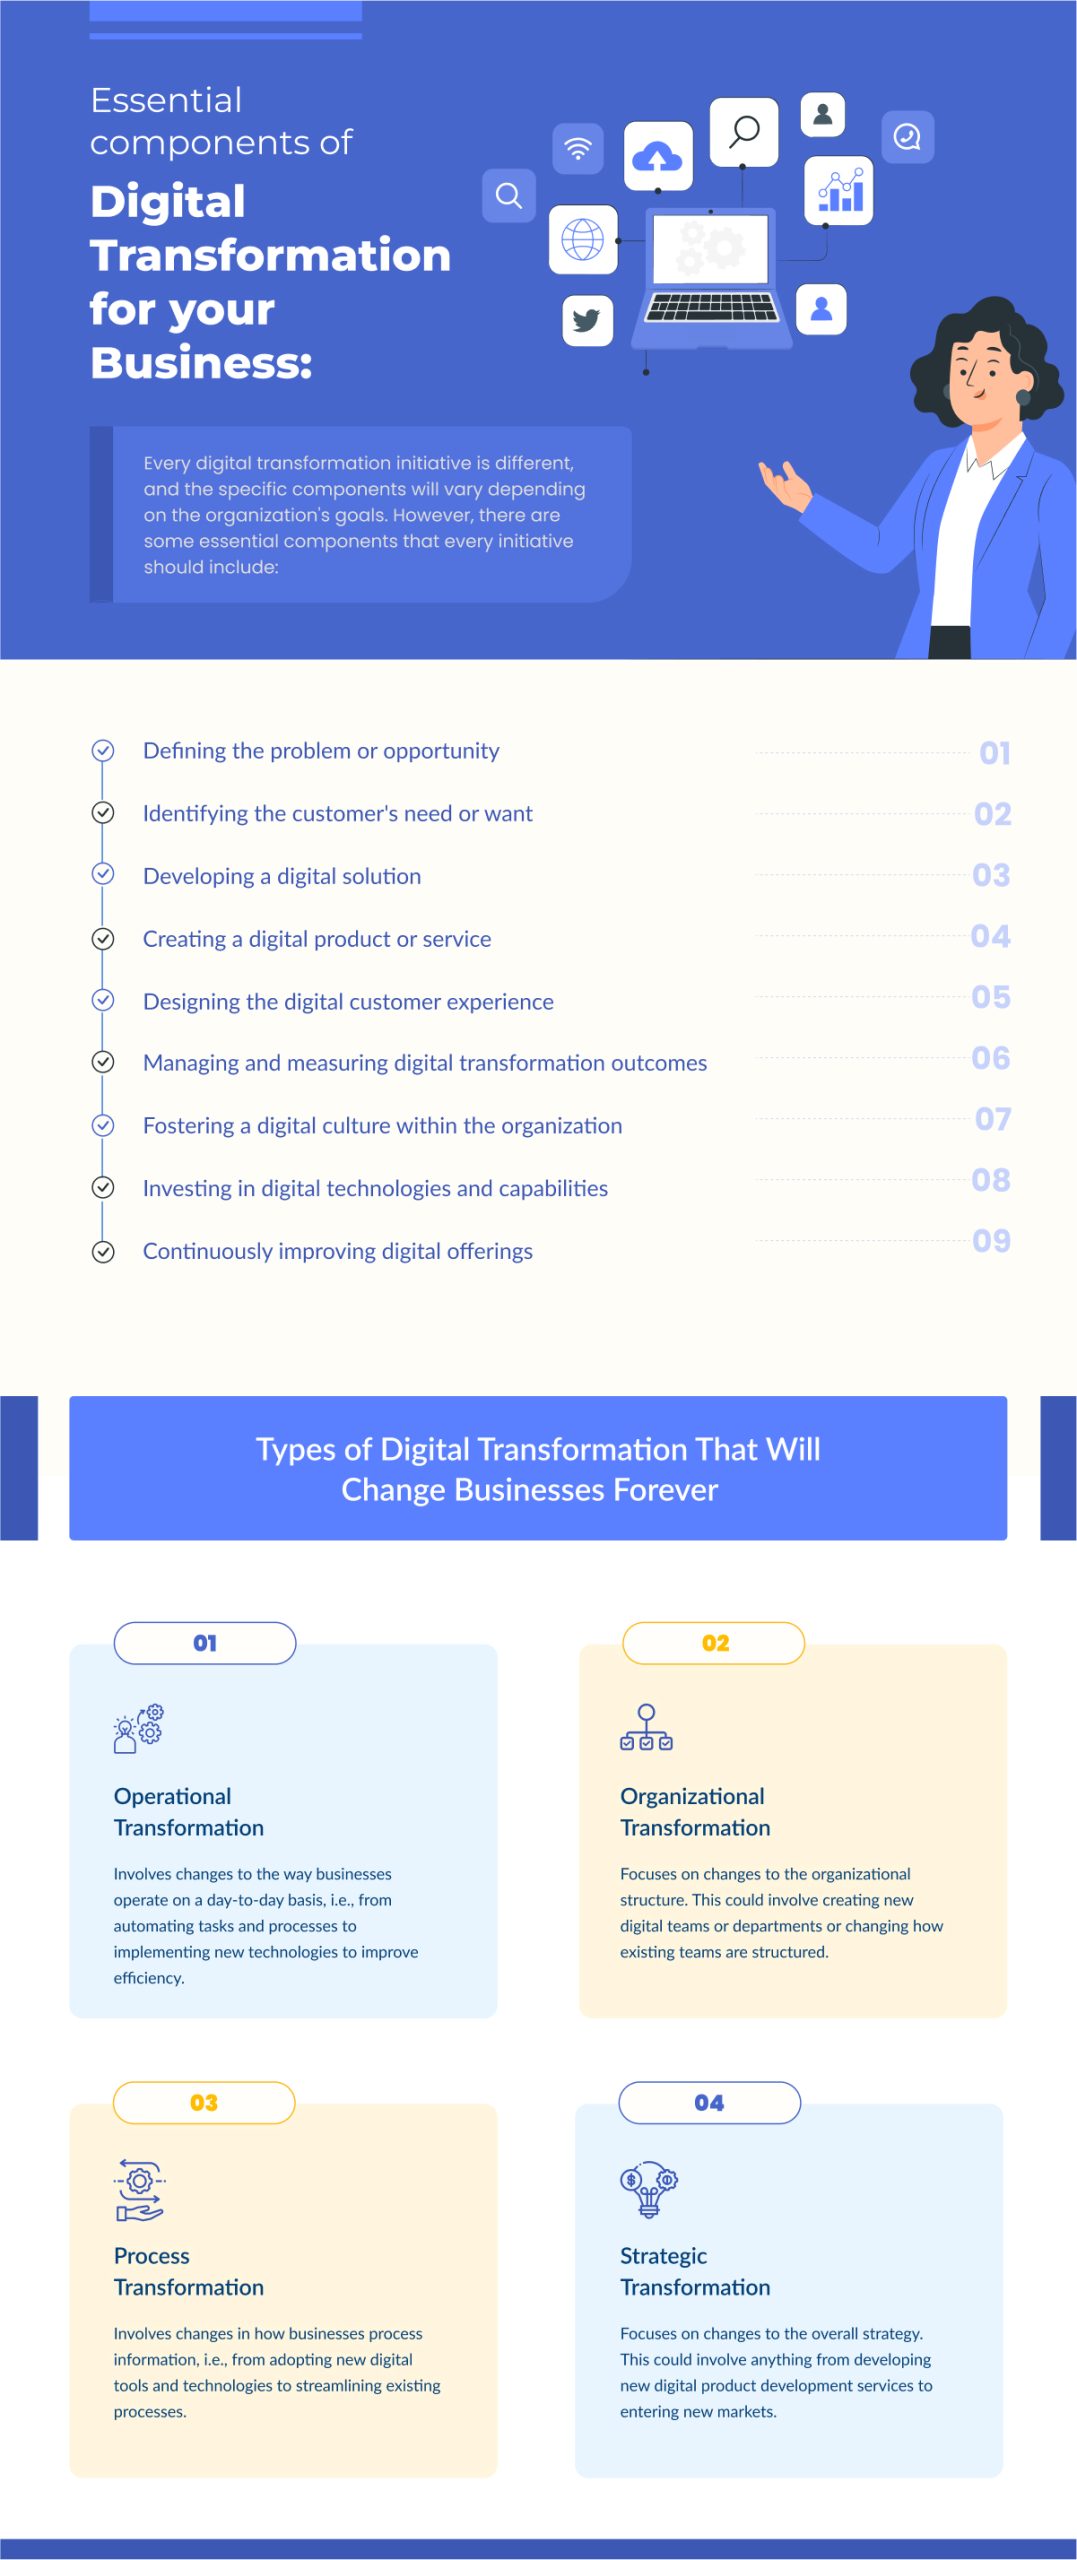 Essential components of digital transformation for your business